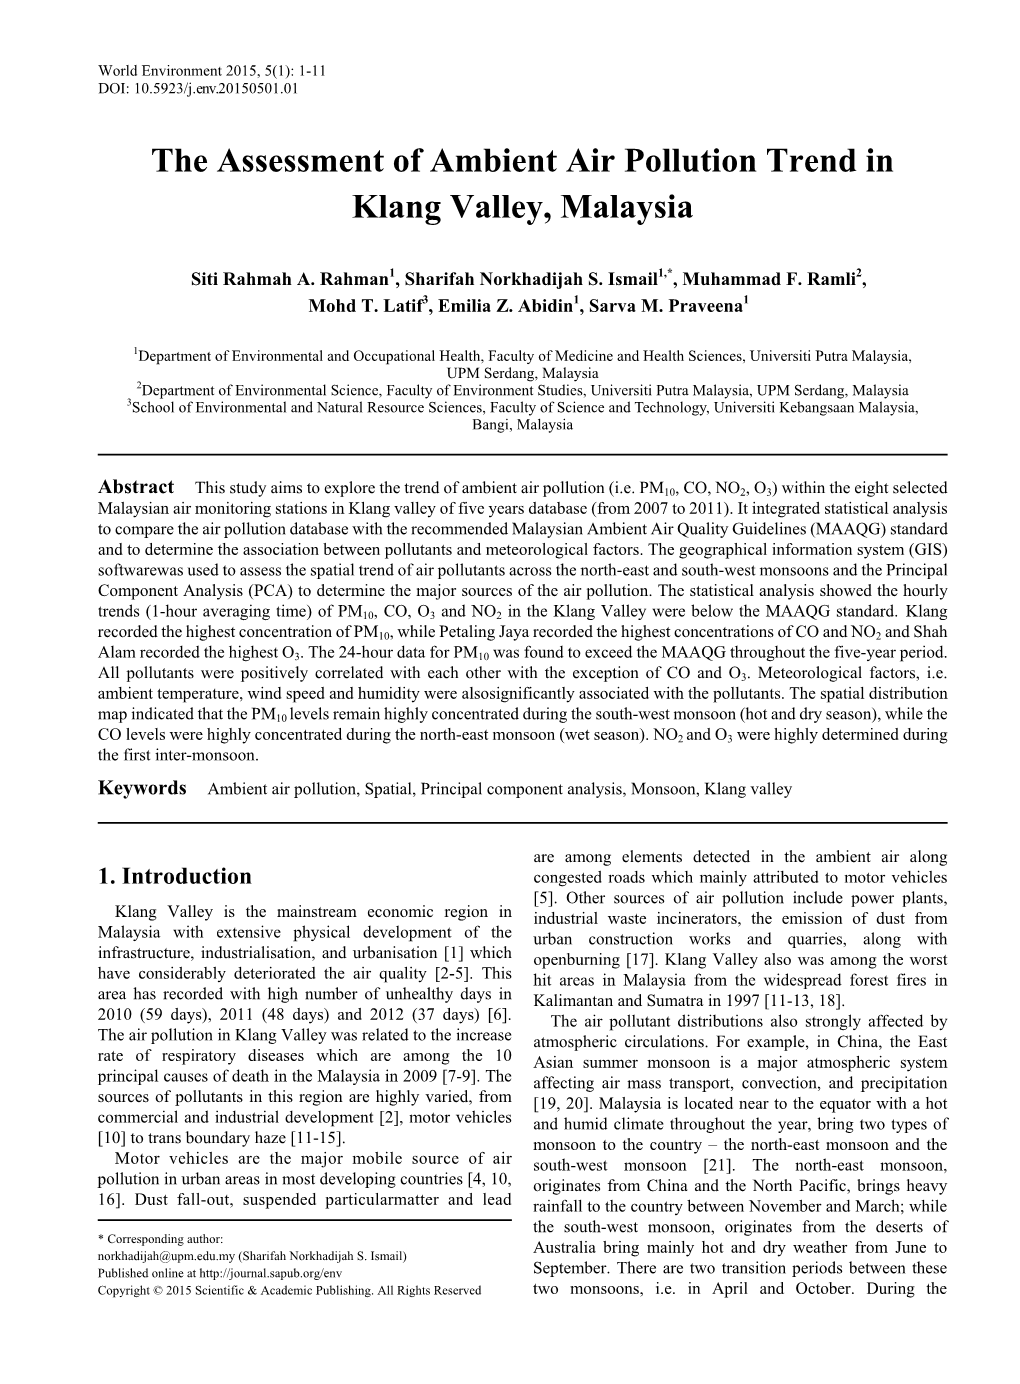 The Assessment of Ambient Air Pollution Trend in Klang Valley, Malaysia